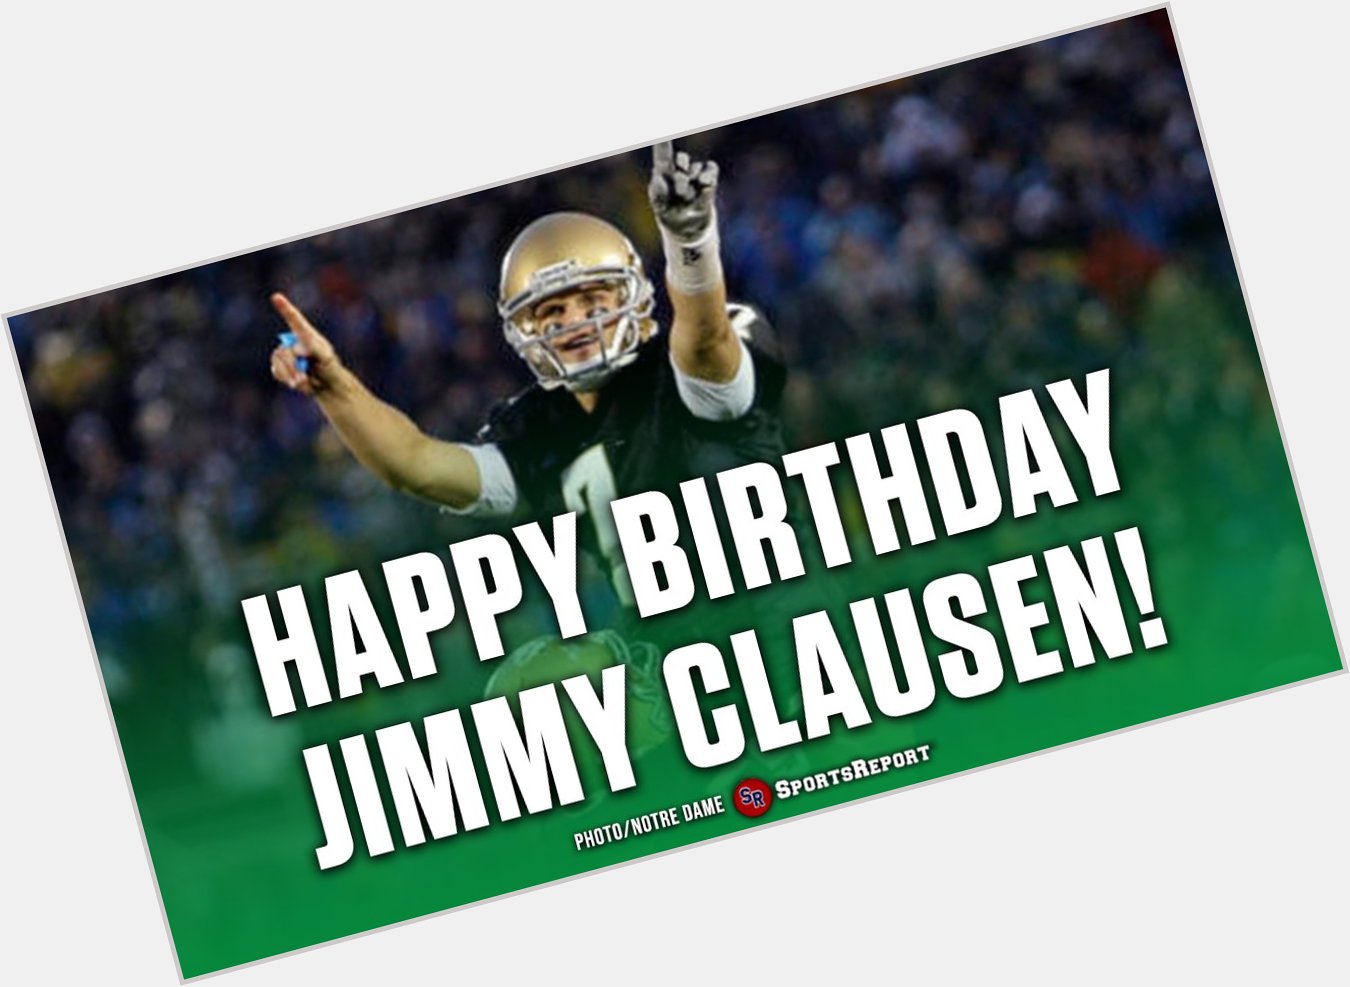  Fans, let\s wish Jimmy Clausen a Happy Birthday! 